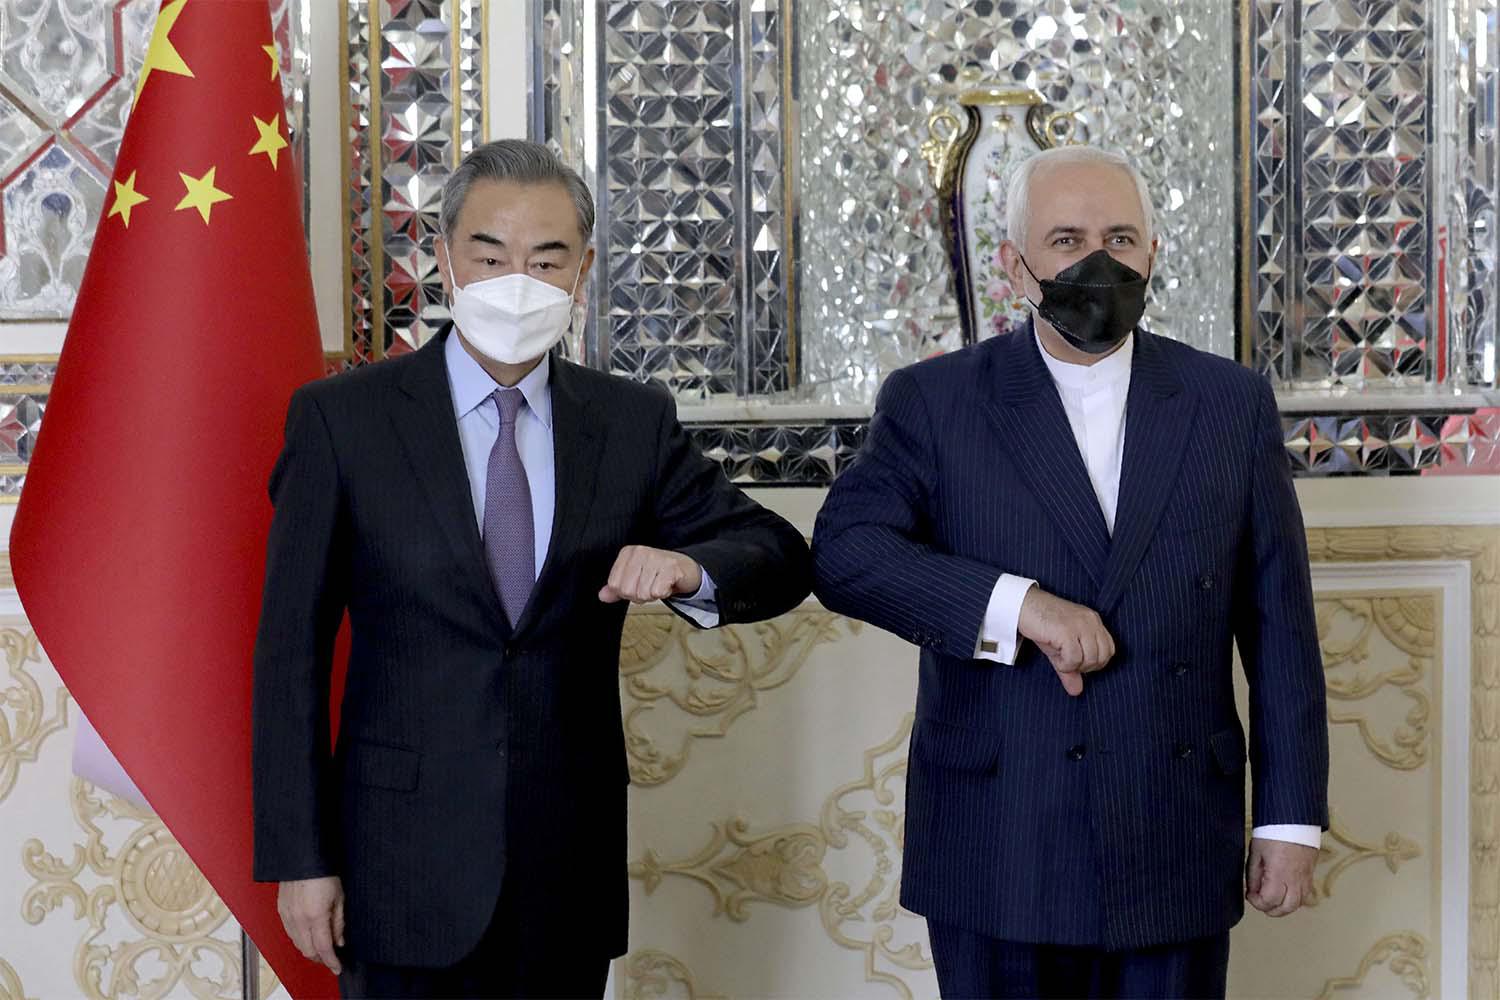 Iran and China on March 27 signed a 25-year strategic cooperation agreement